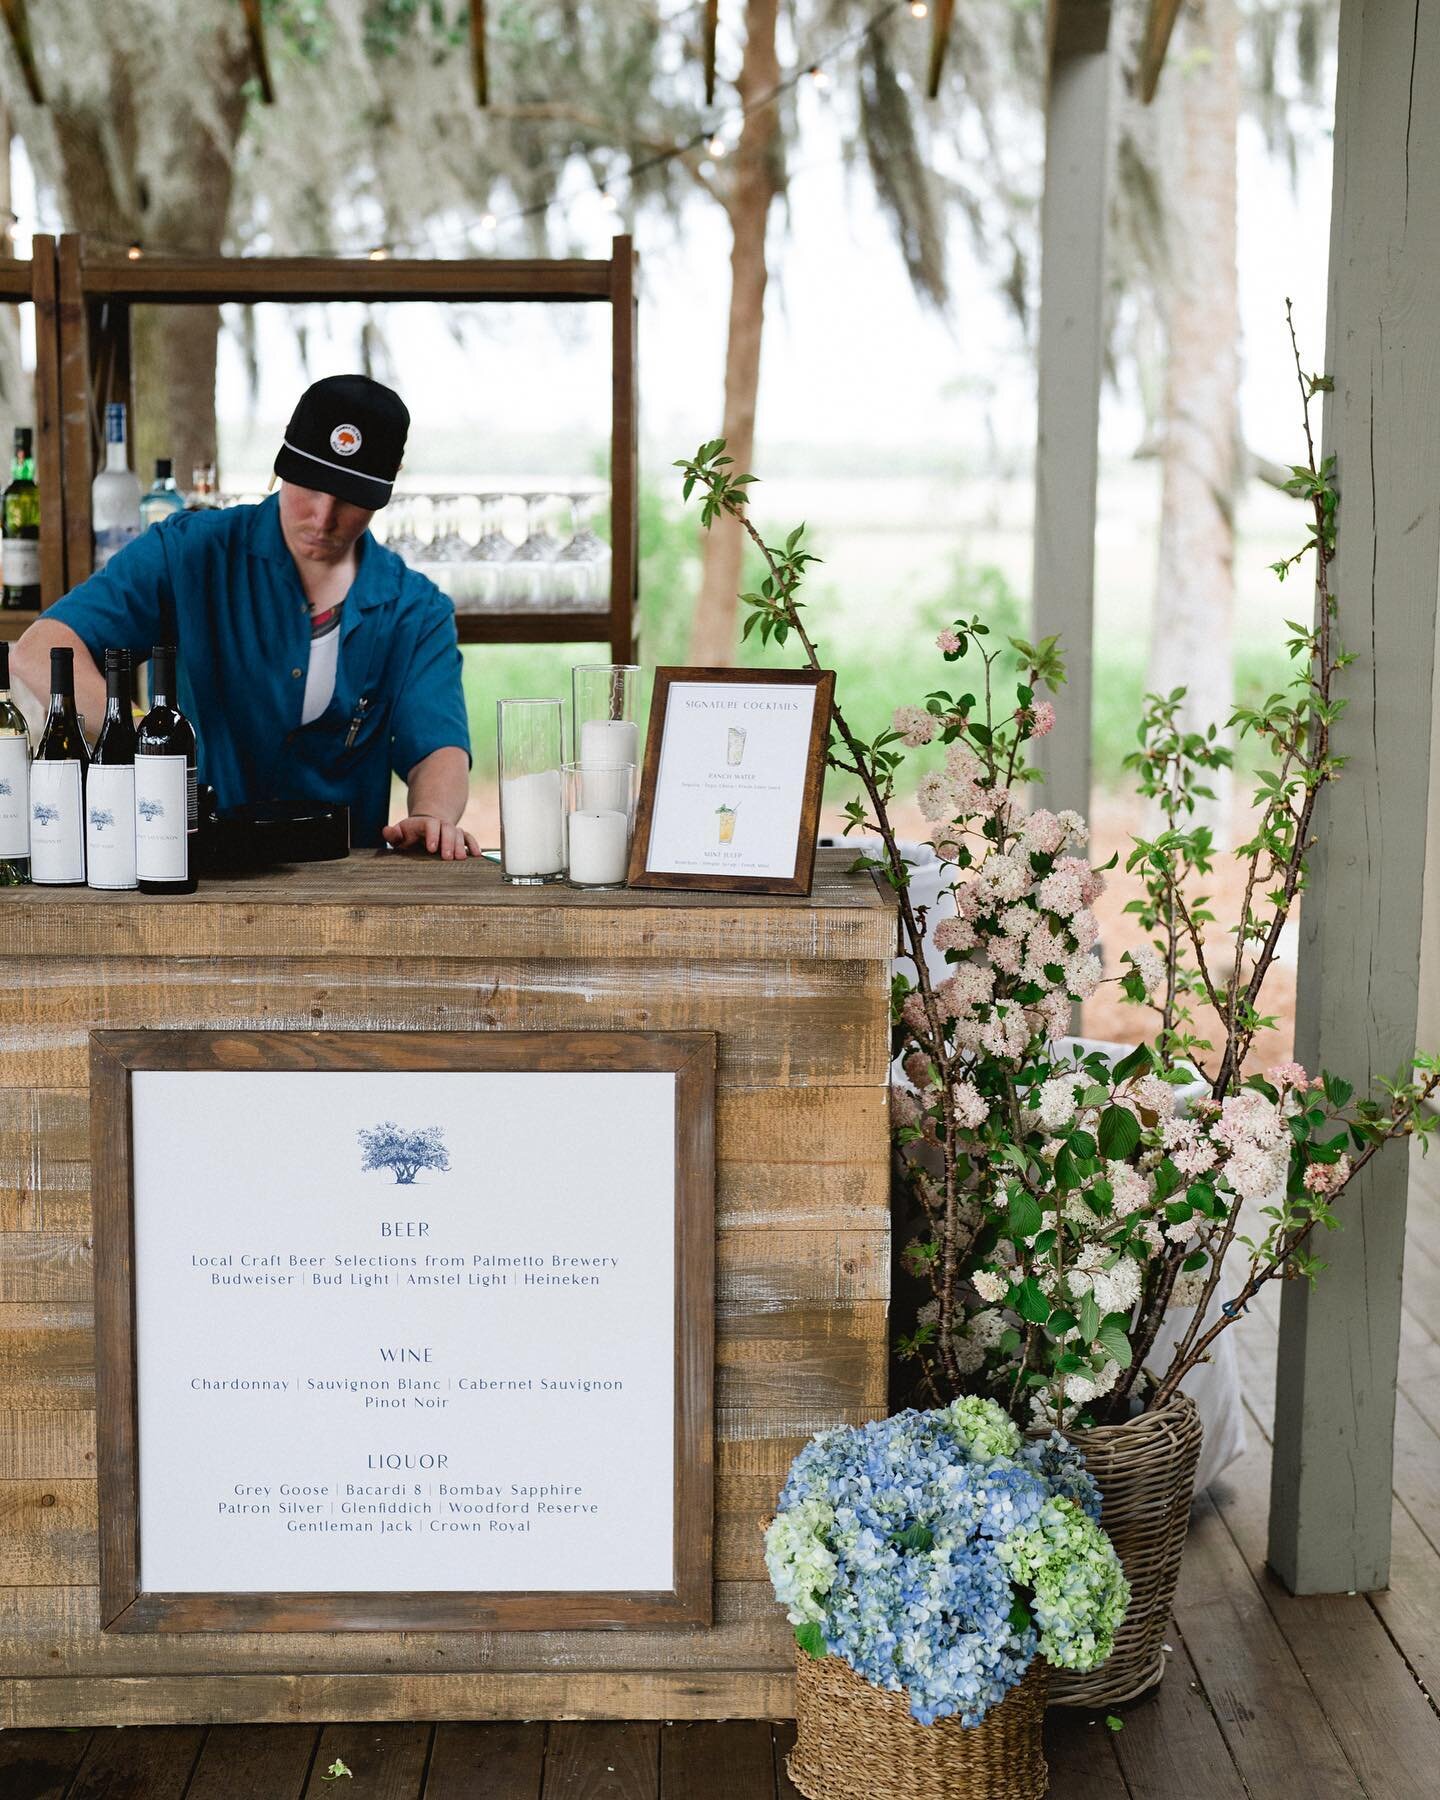 Cheers to a perfectly styled bar! Bar menu, signature cocktails and bottle labels custom designed to create an extra special touch. 
.
.
.
#luxurywedding #charlestonwedding #kiawahislandsc #kiawahwedding #weddingdesign #weddingplanner #weddingplannin